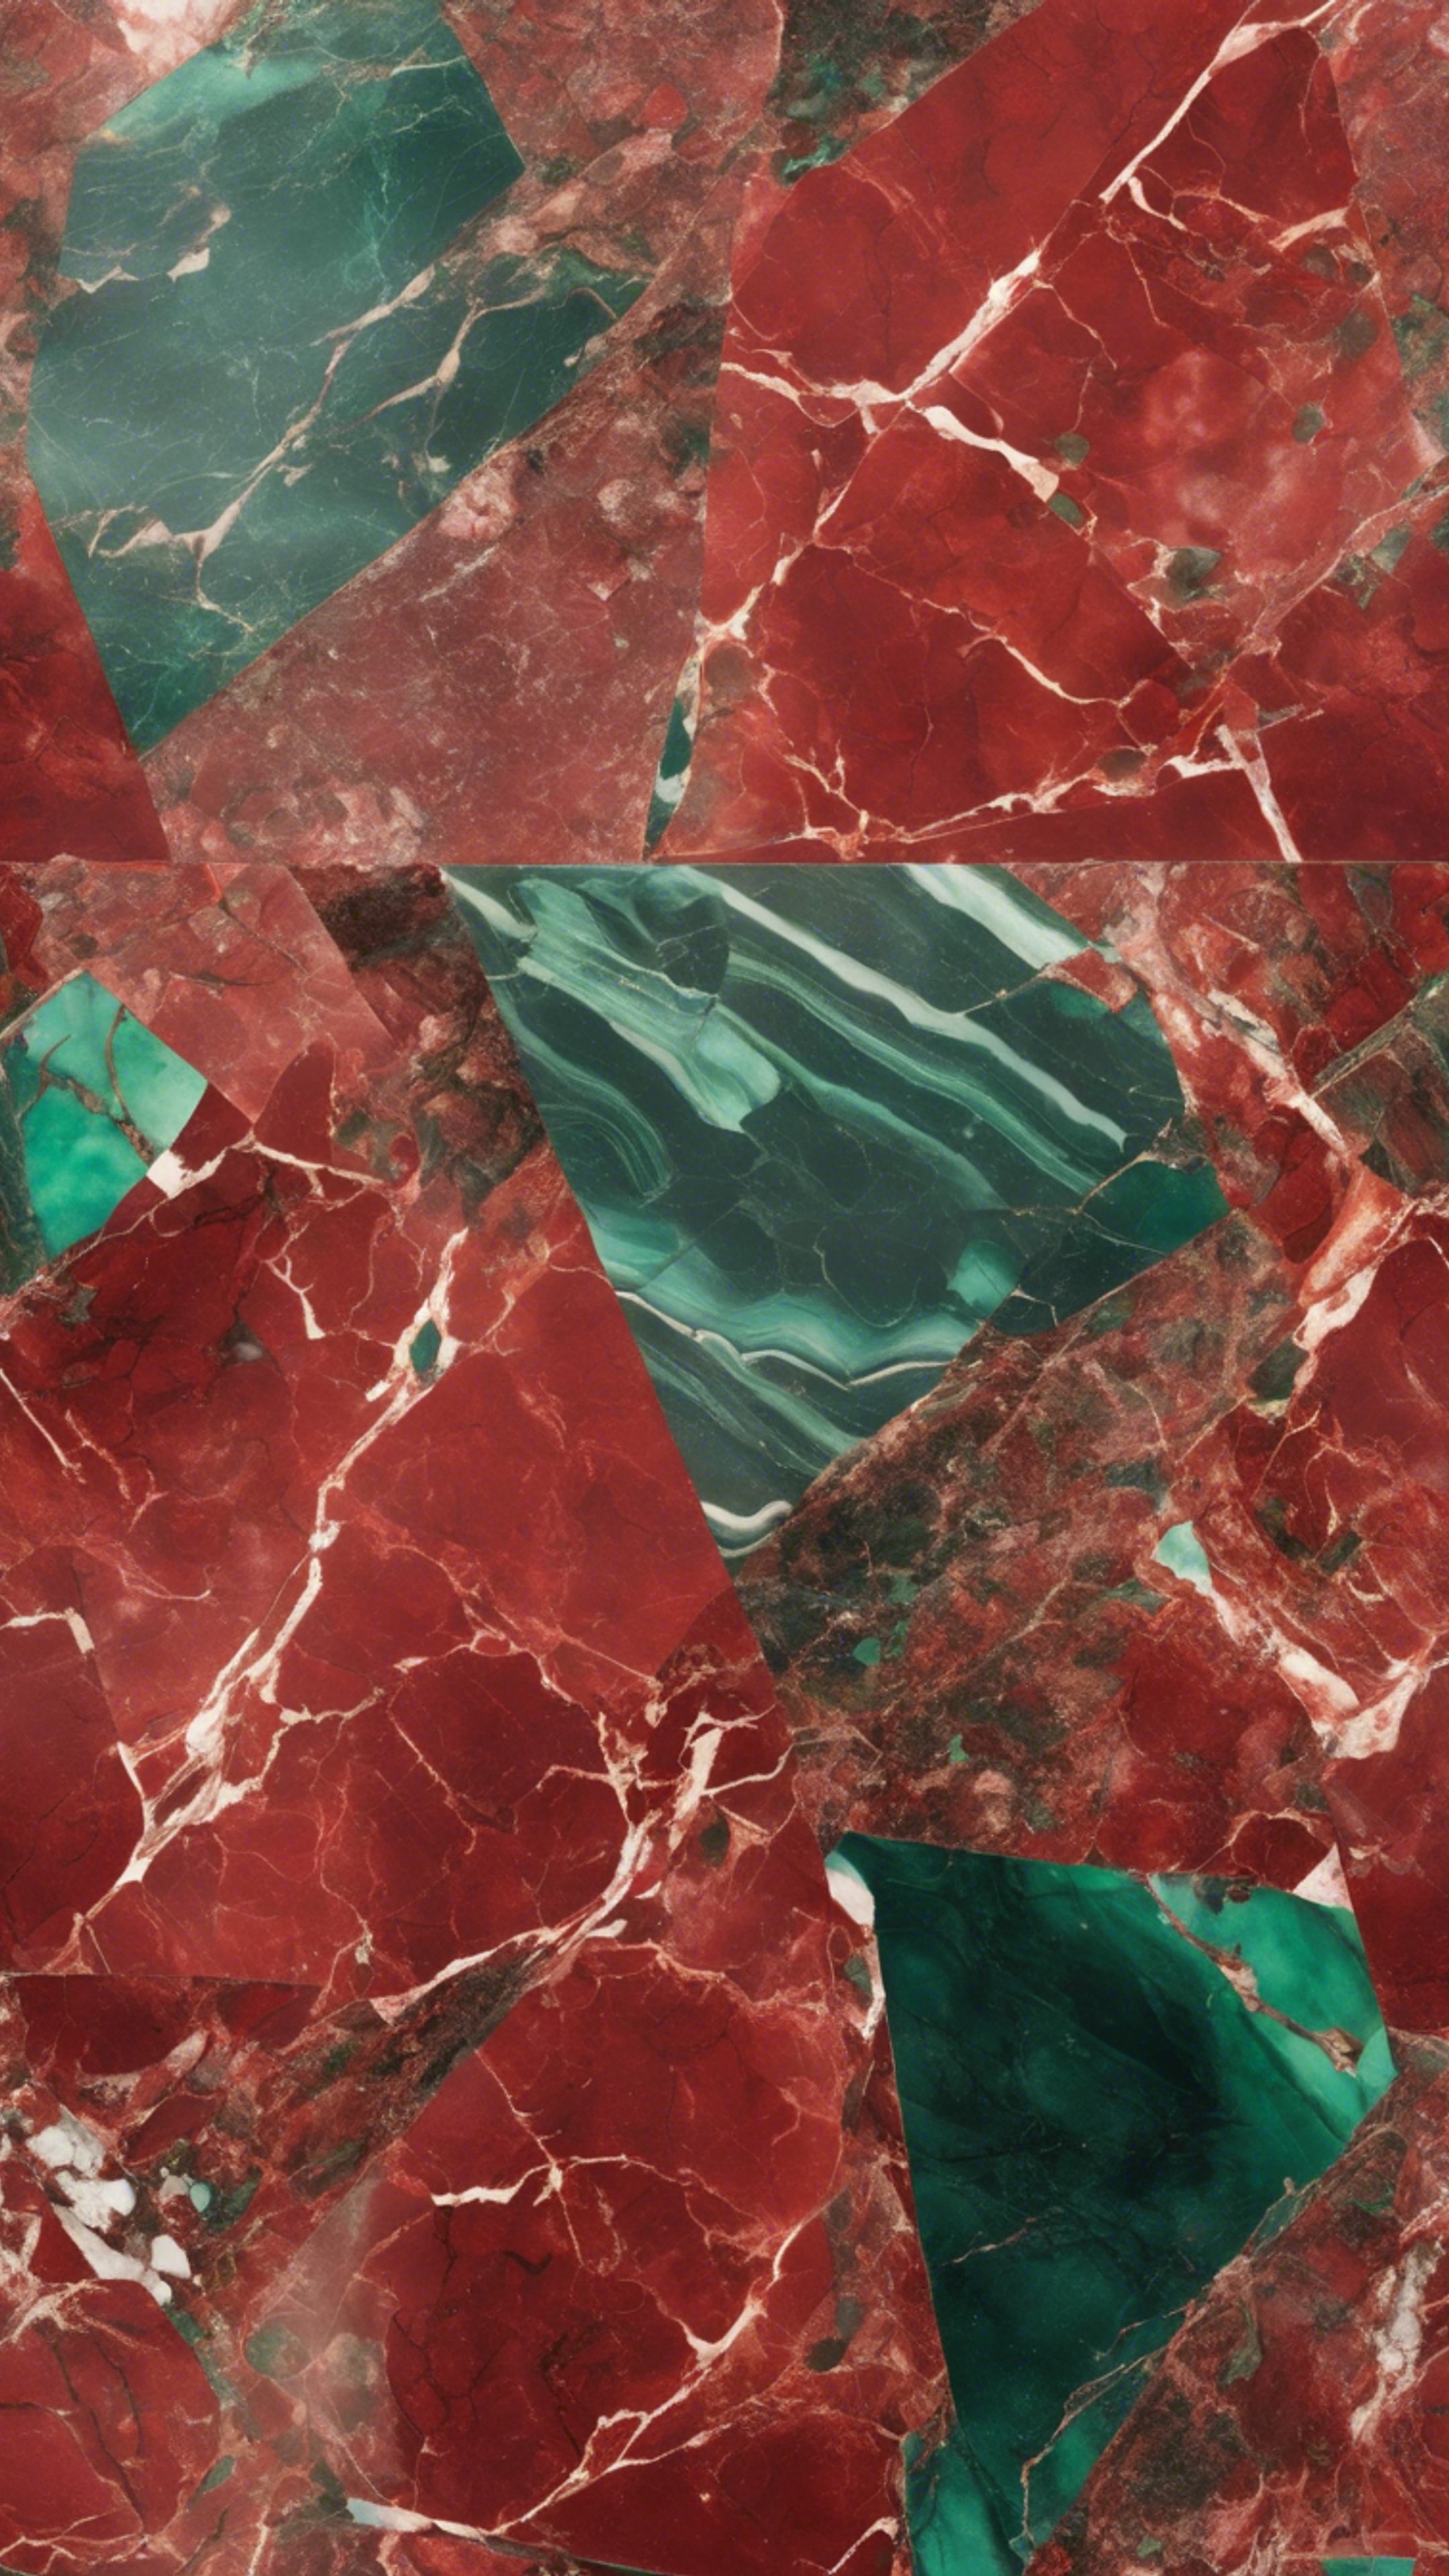 Artistic red and green marble pattern showing rich textures.壁紙[98bc637281684a3dba4a]